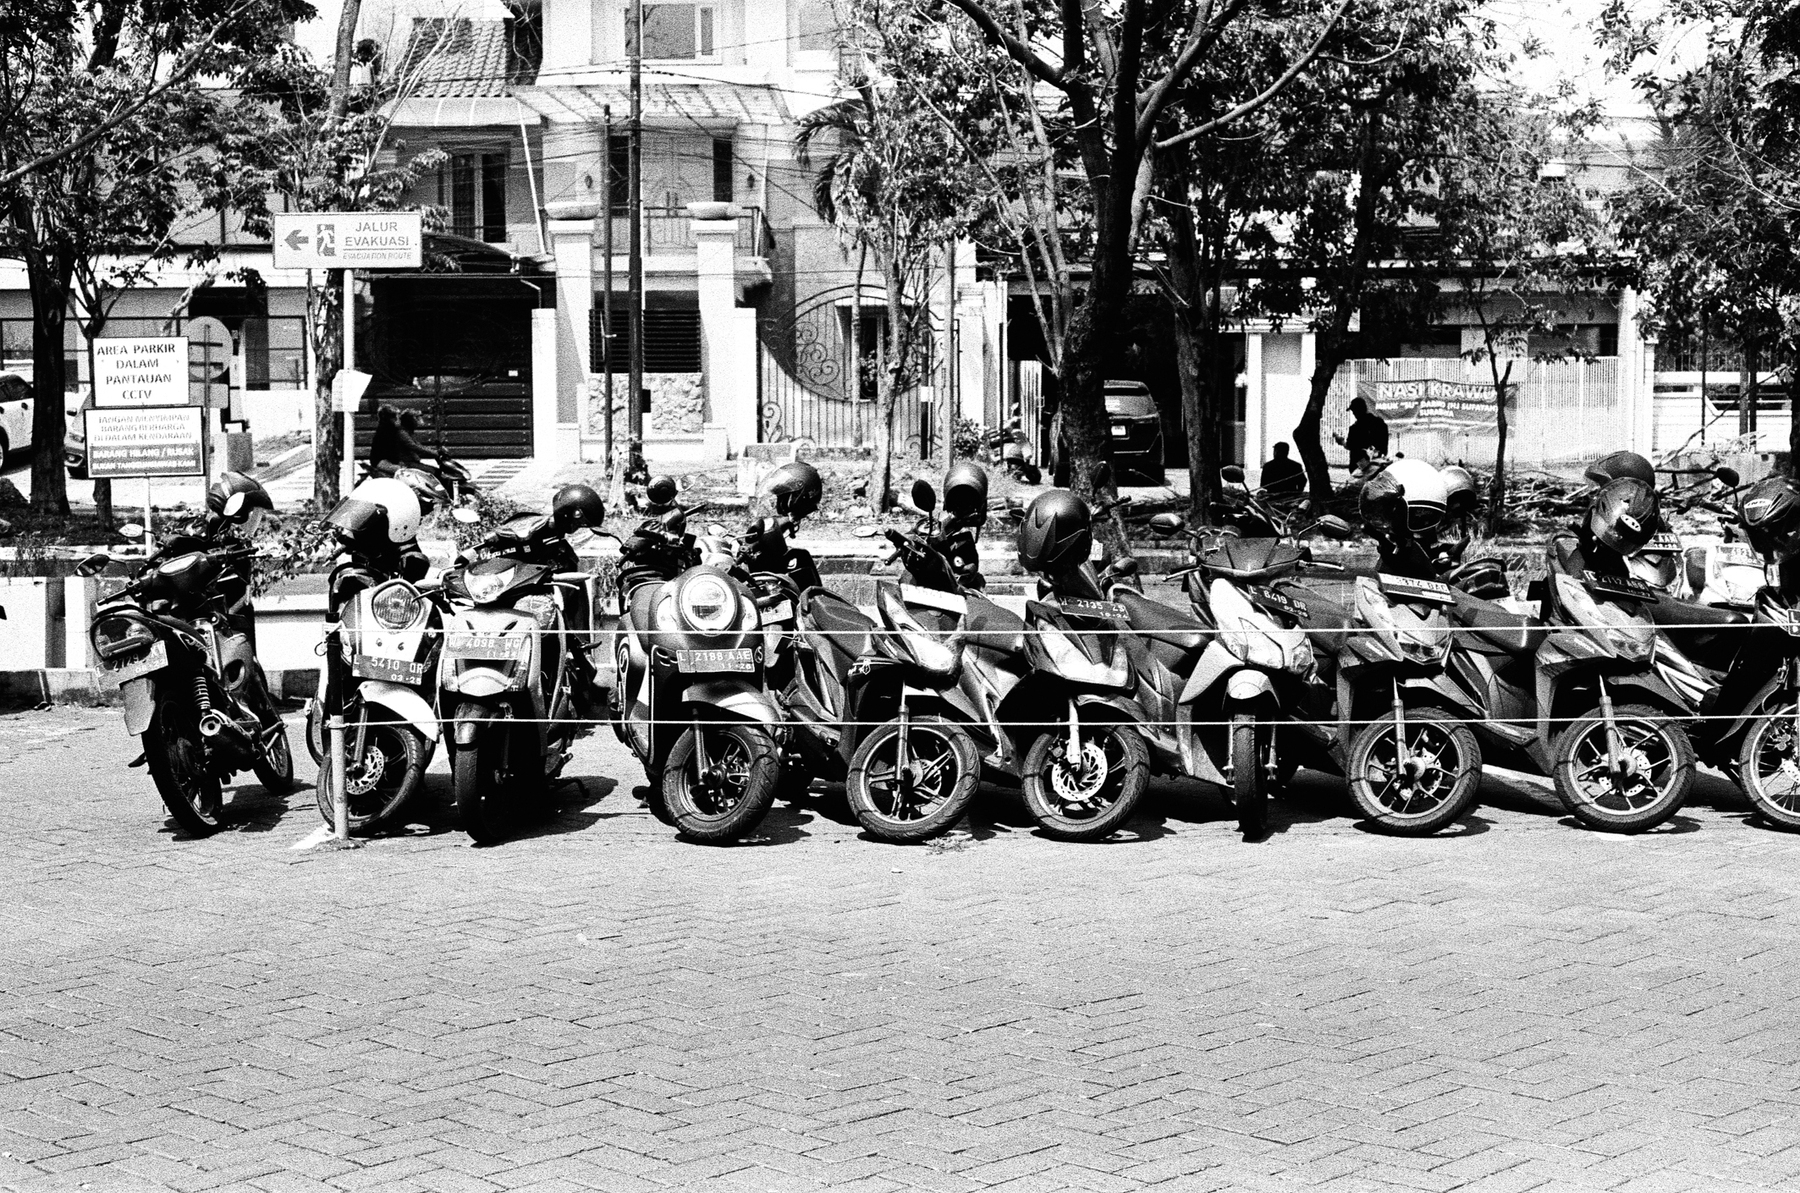 a scan of a black and white photo of dozens of motorbikes parked on the street